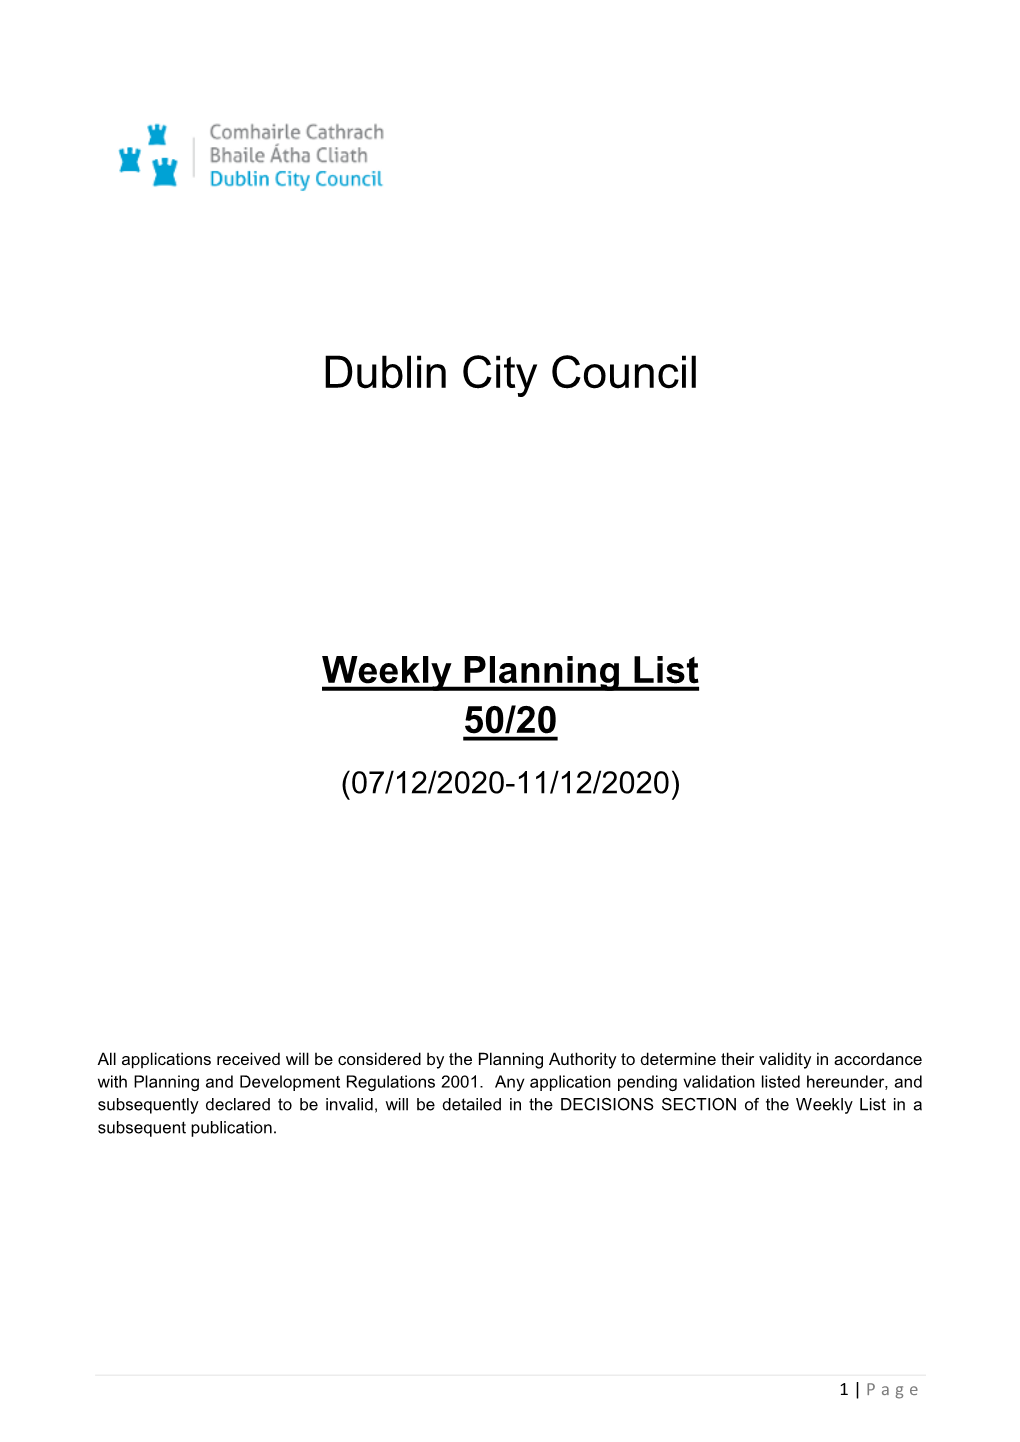 Weekly Planning List 50/20